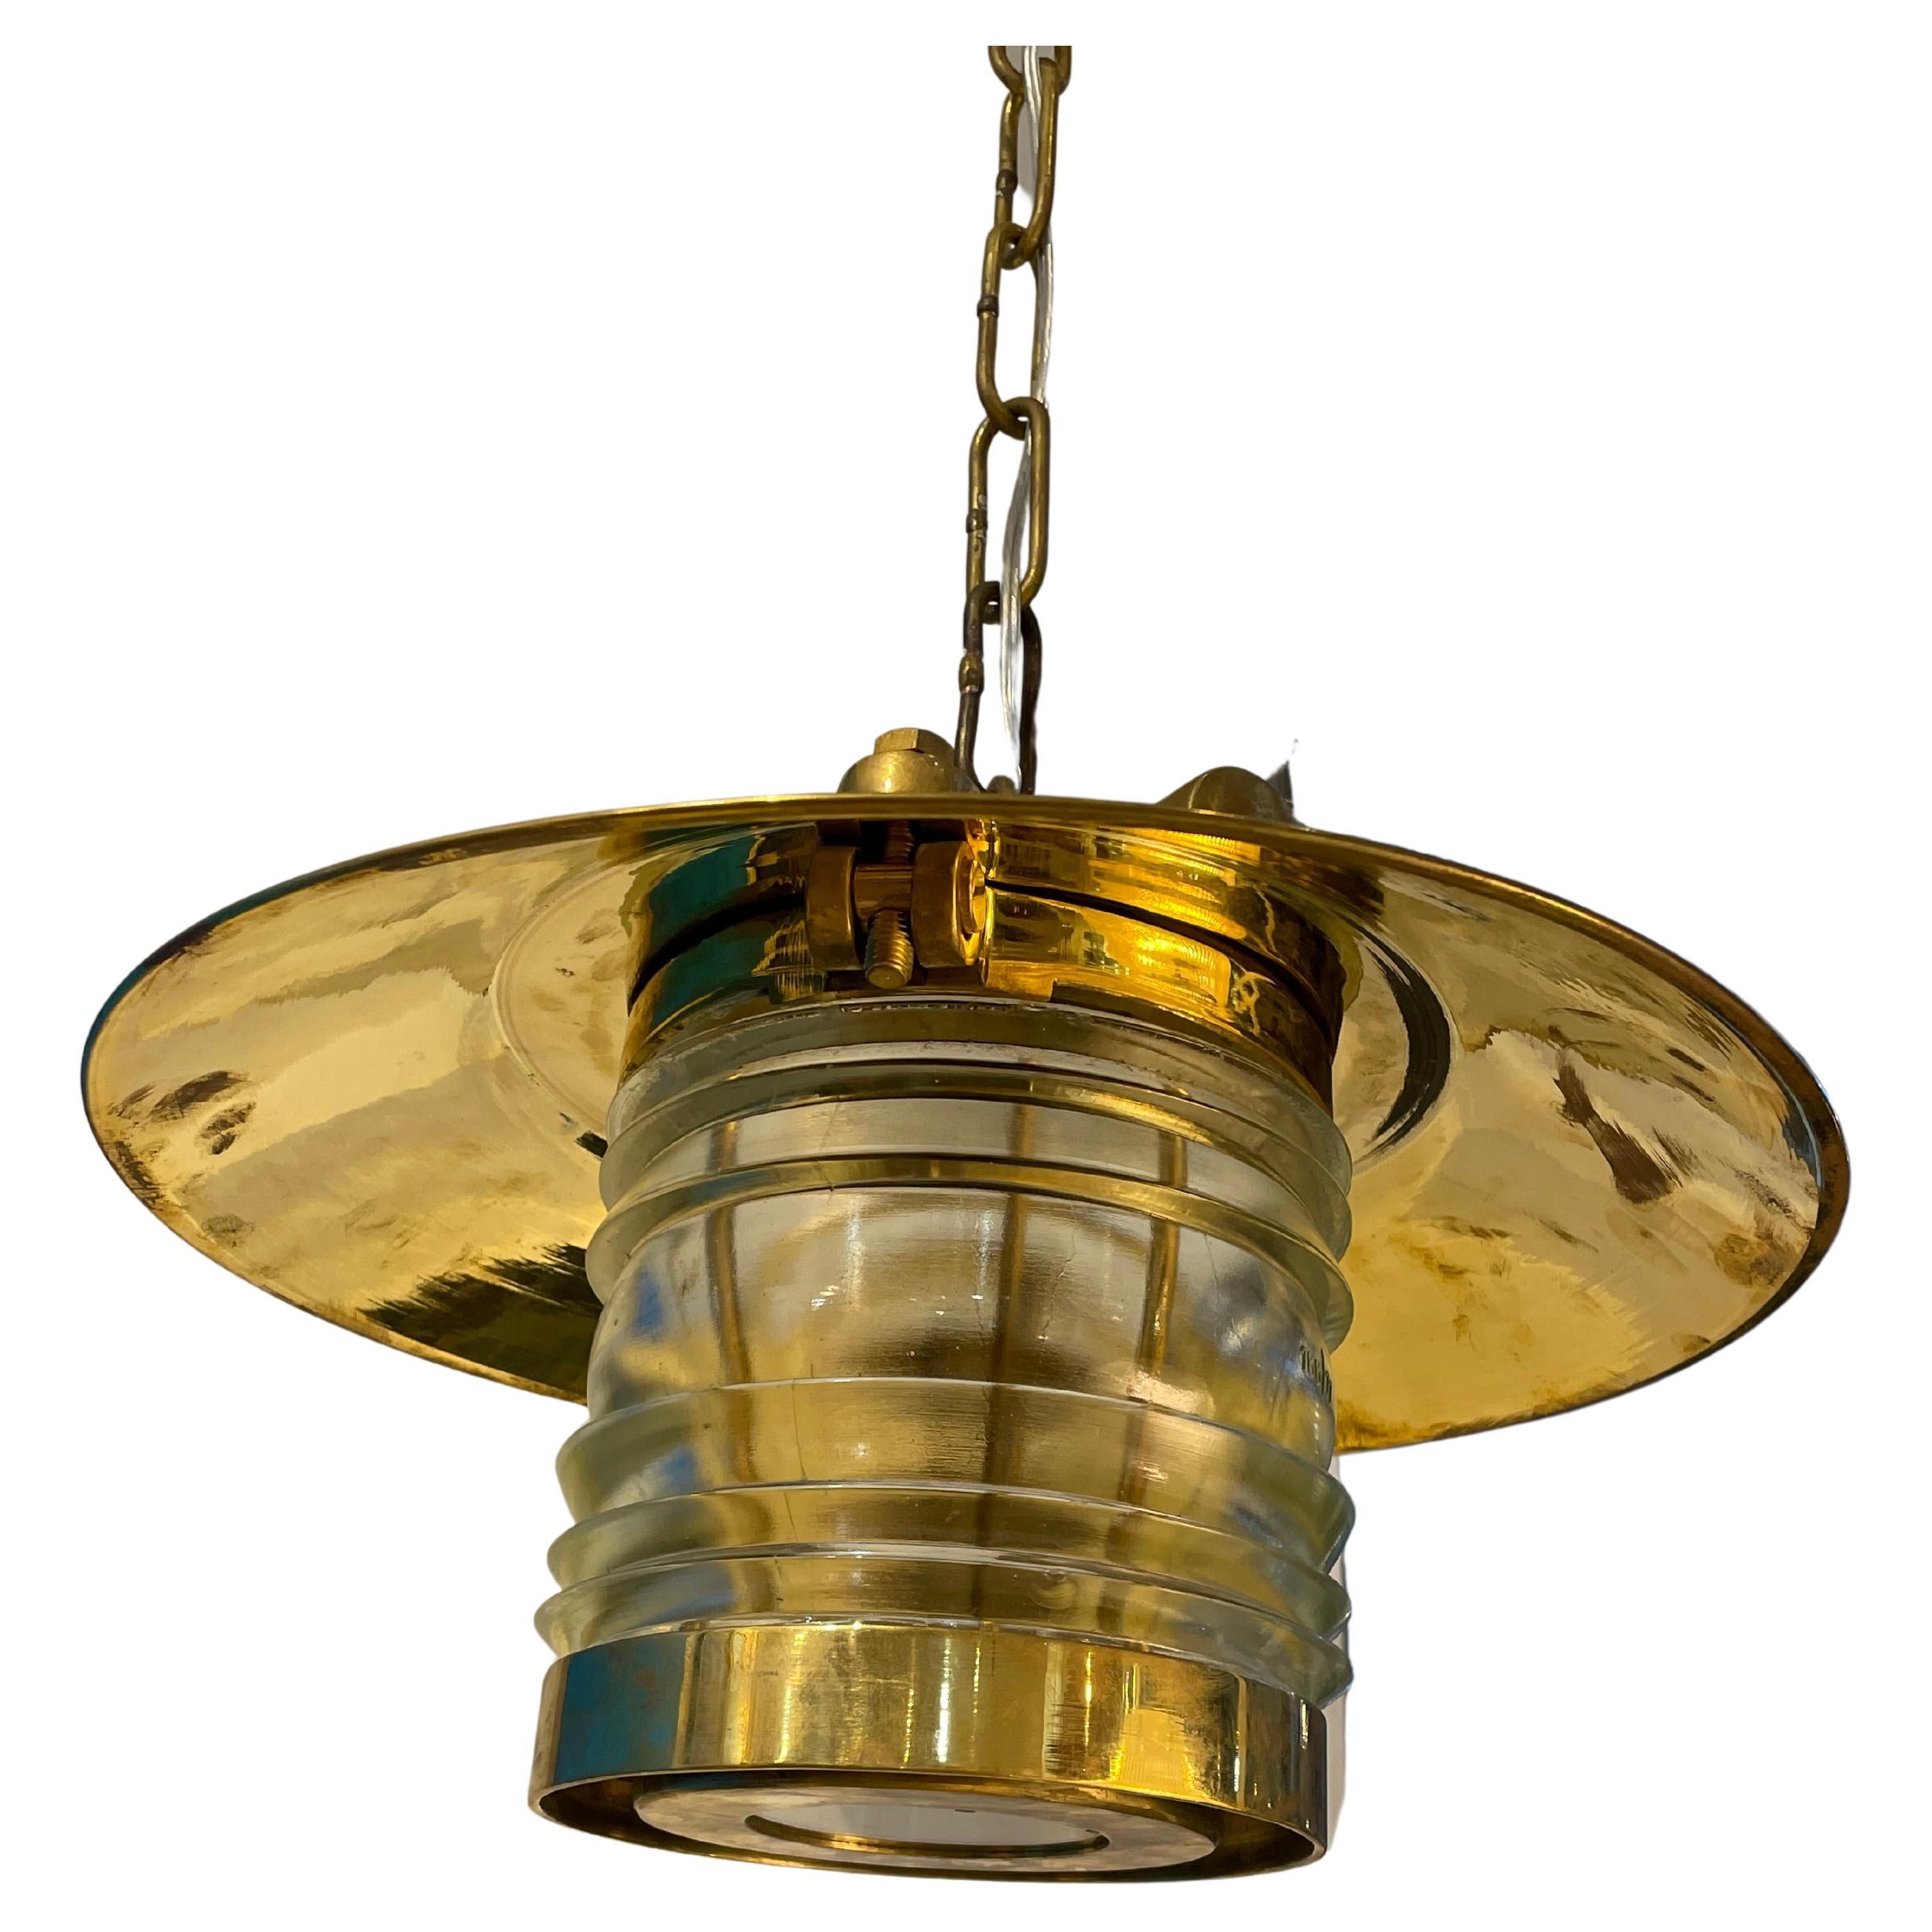 A pair of brass pendant lights from a decommissioned ship. The brass hat portion is 15